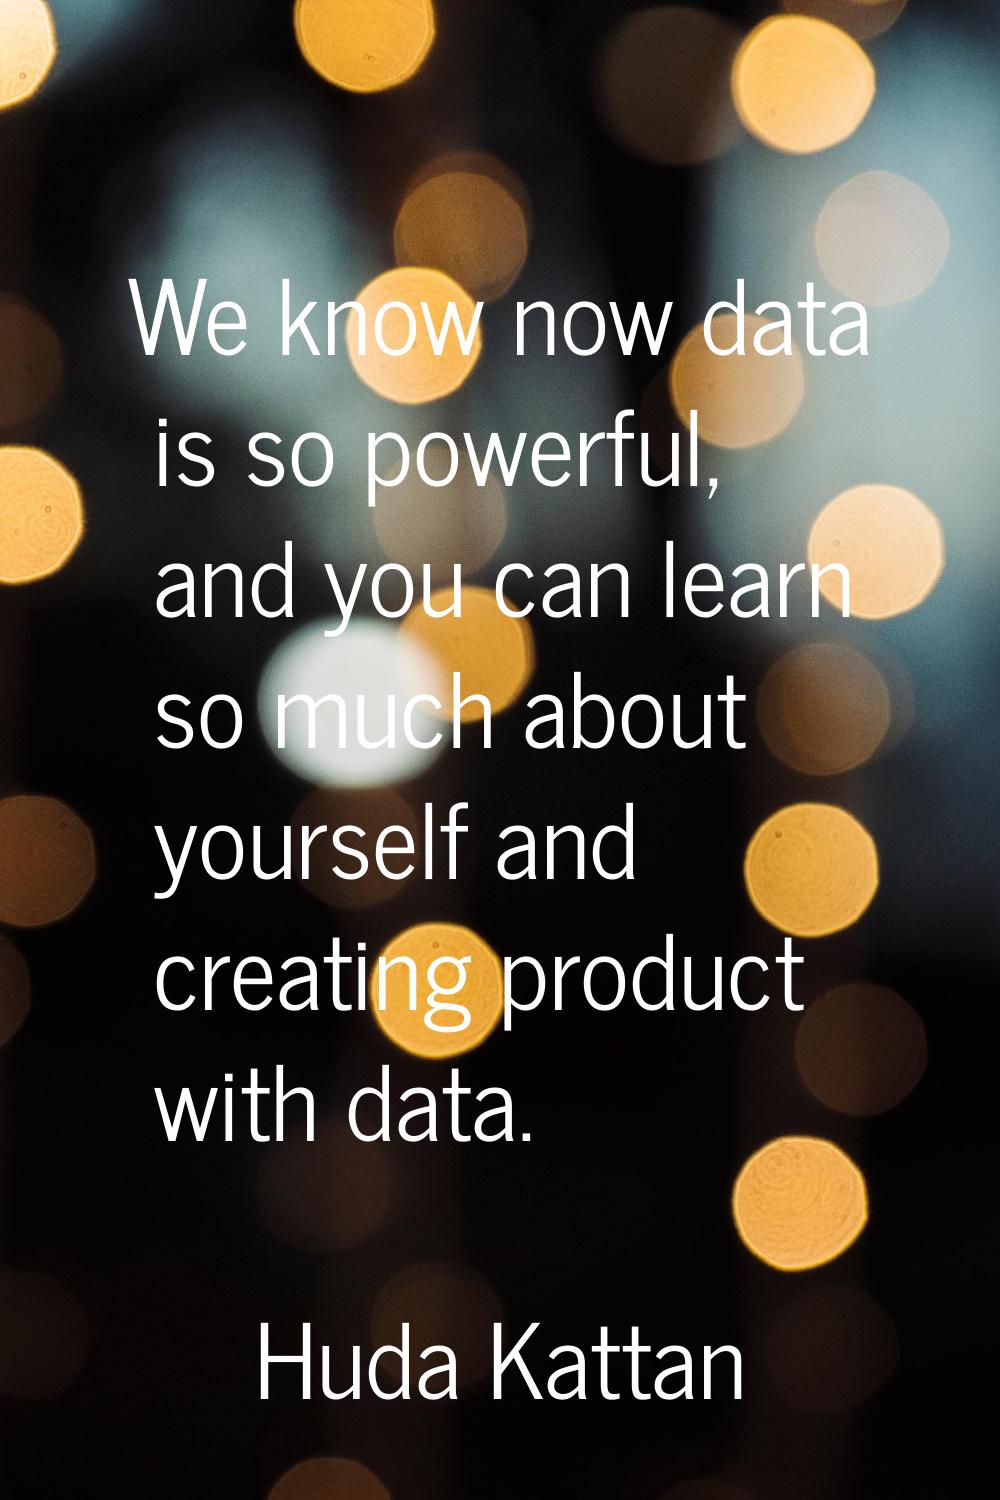 We know now data is so powerful, and you can learn so much about yourself and creating product with